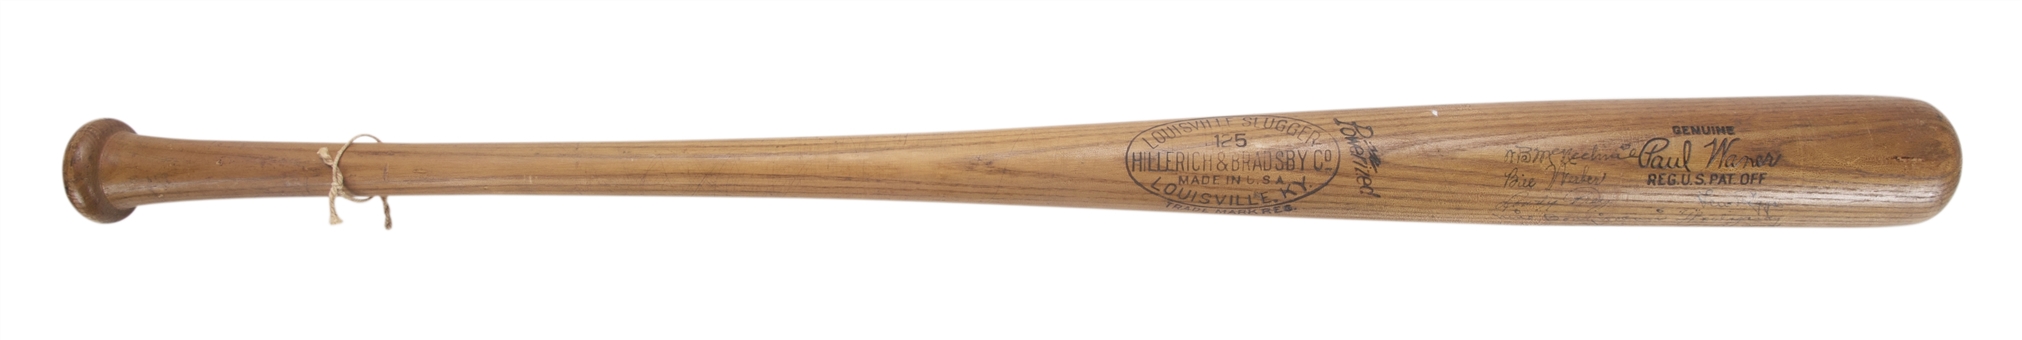 1939 Paul Waner Professional Model Bat Signed by 26 Members of the 1939 National League Champion Cincinnati Reds including Bill McKechnie, Vince DiMaggio, Vander Meer, and Lombardi (JSA)